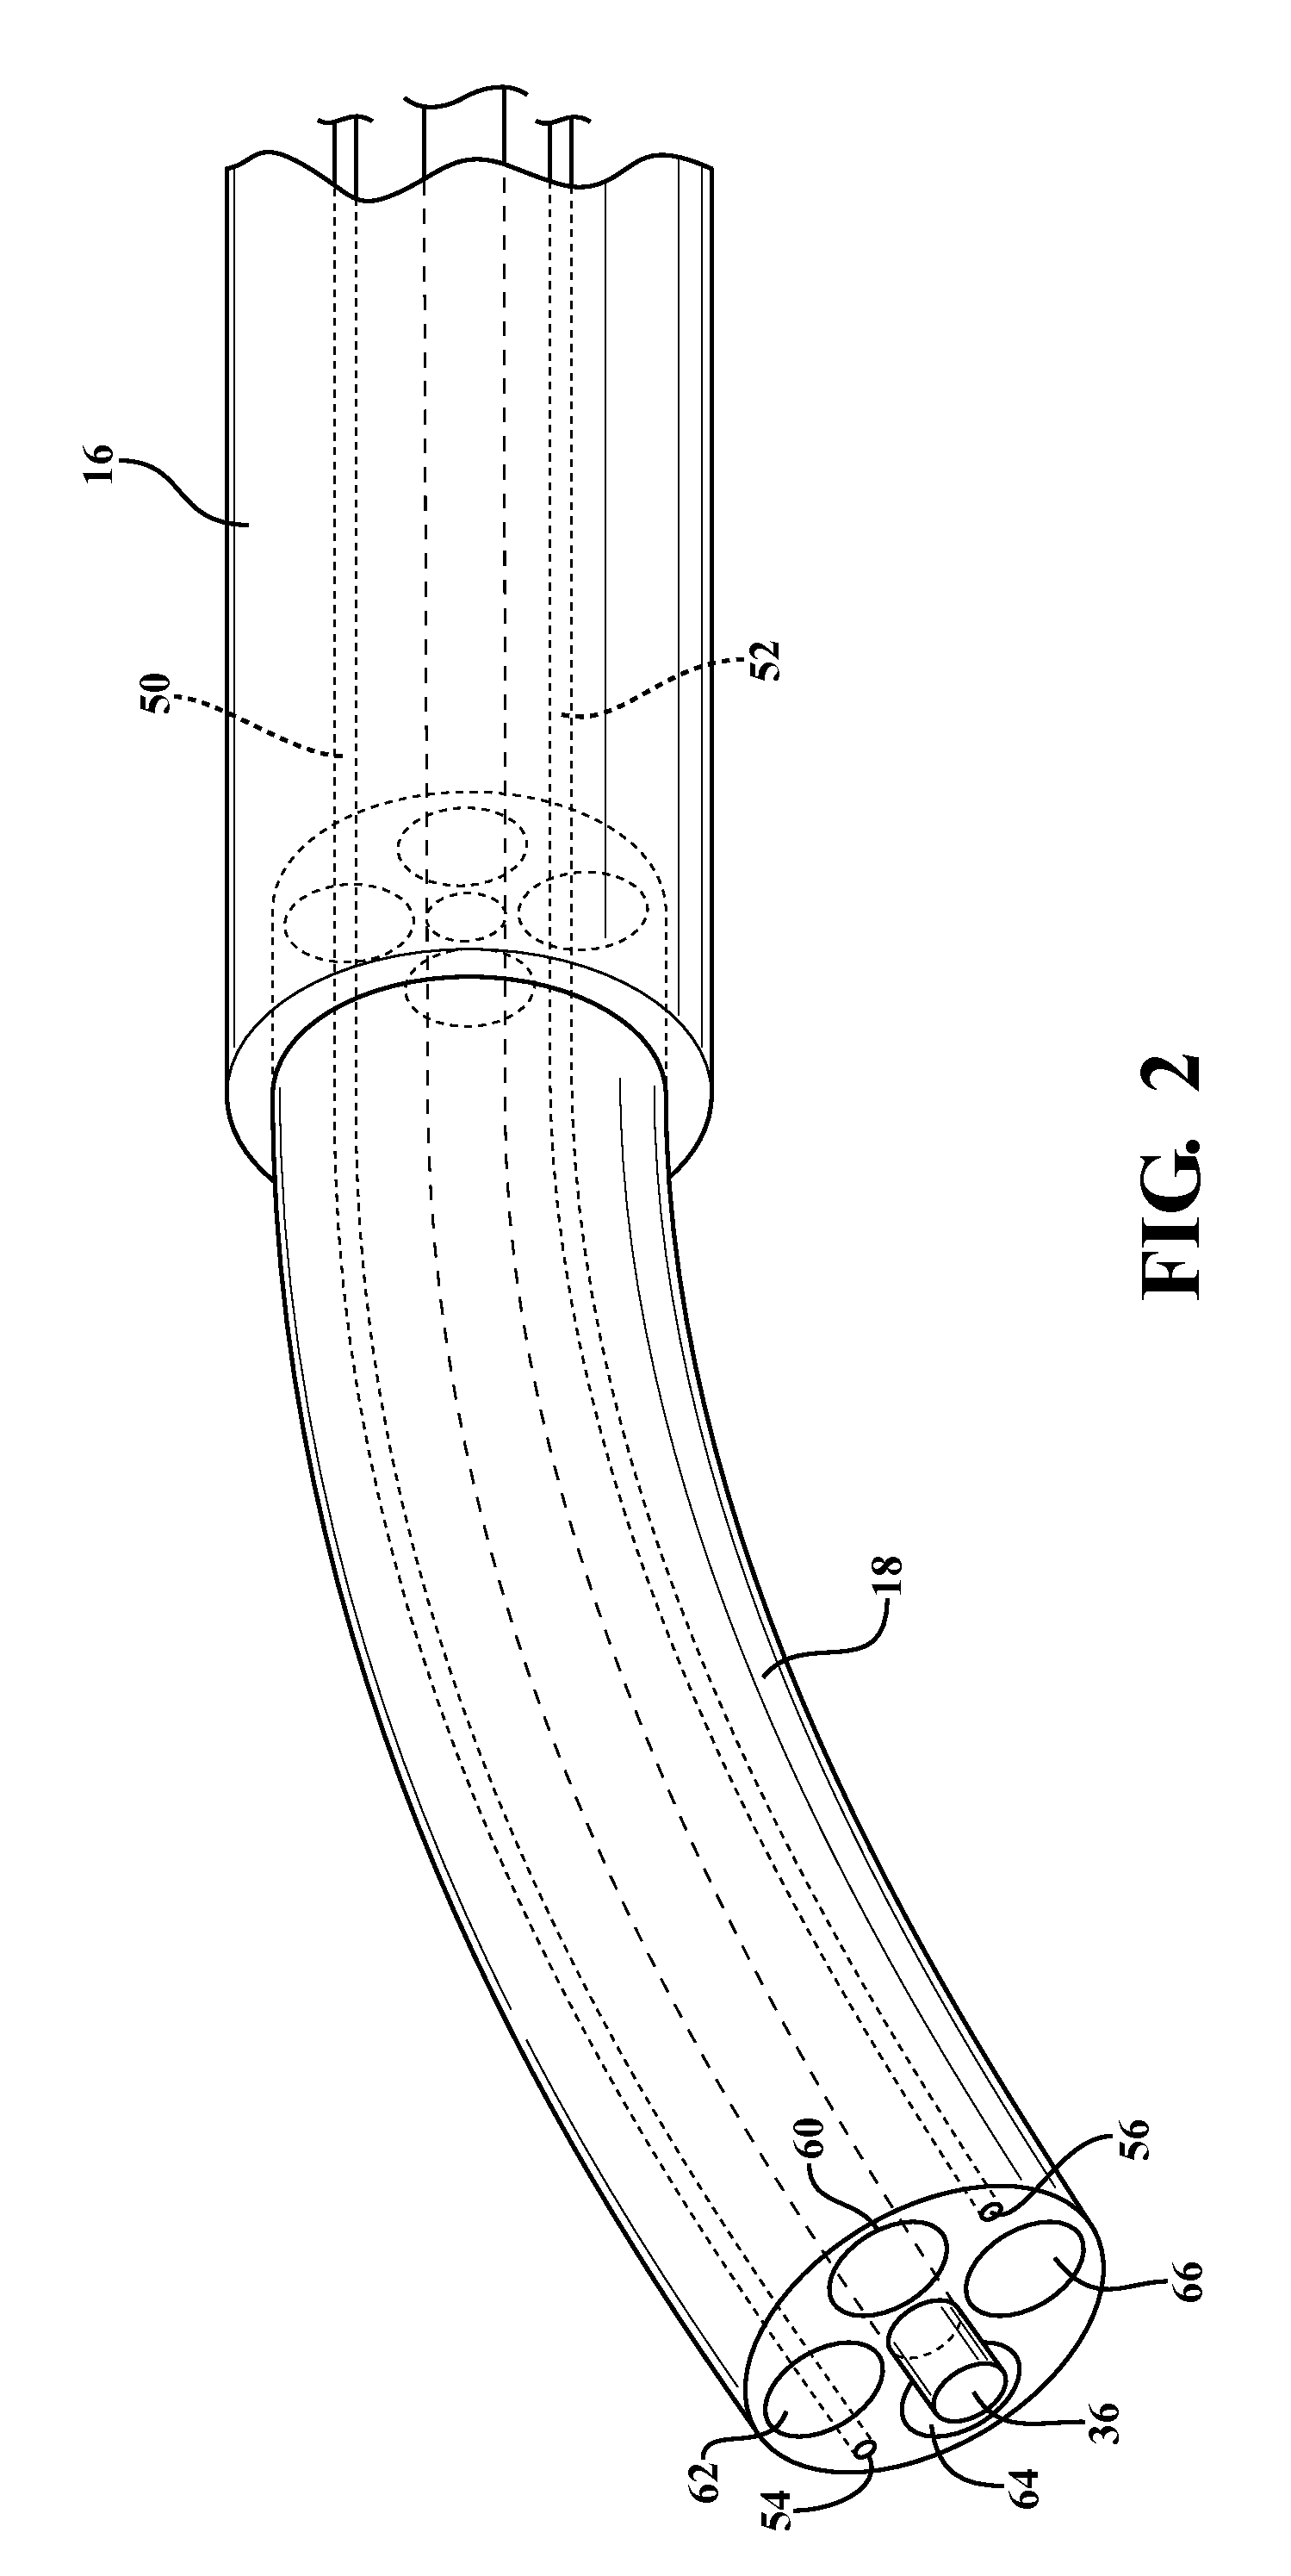 Method and apparatus for cold plasma treatment of internal organs